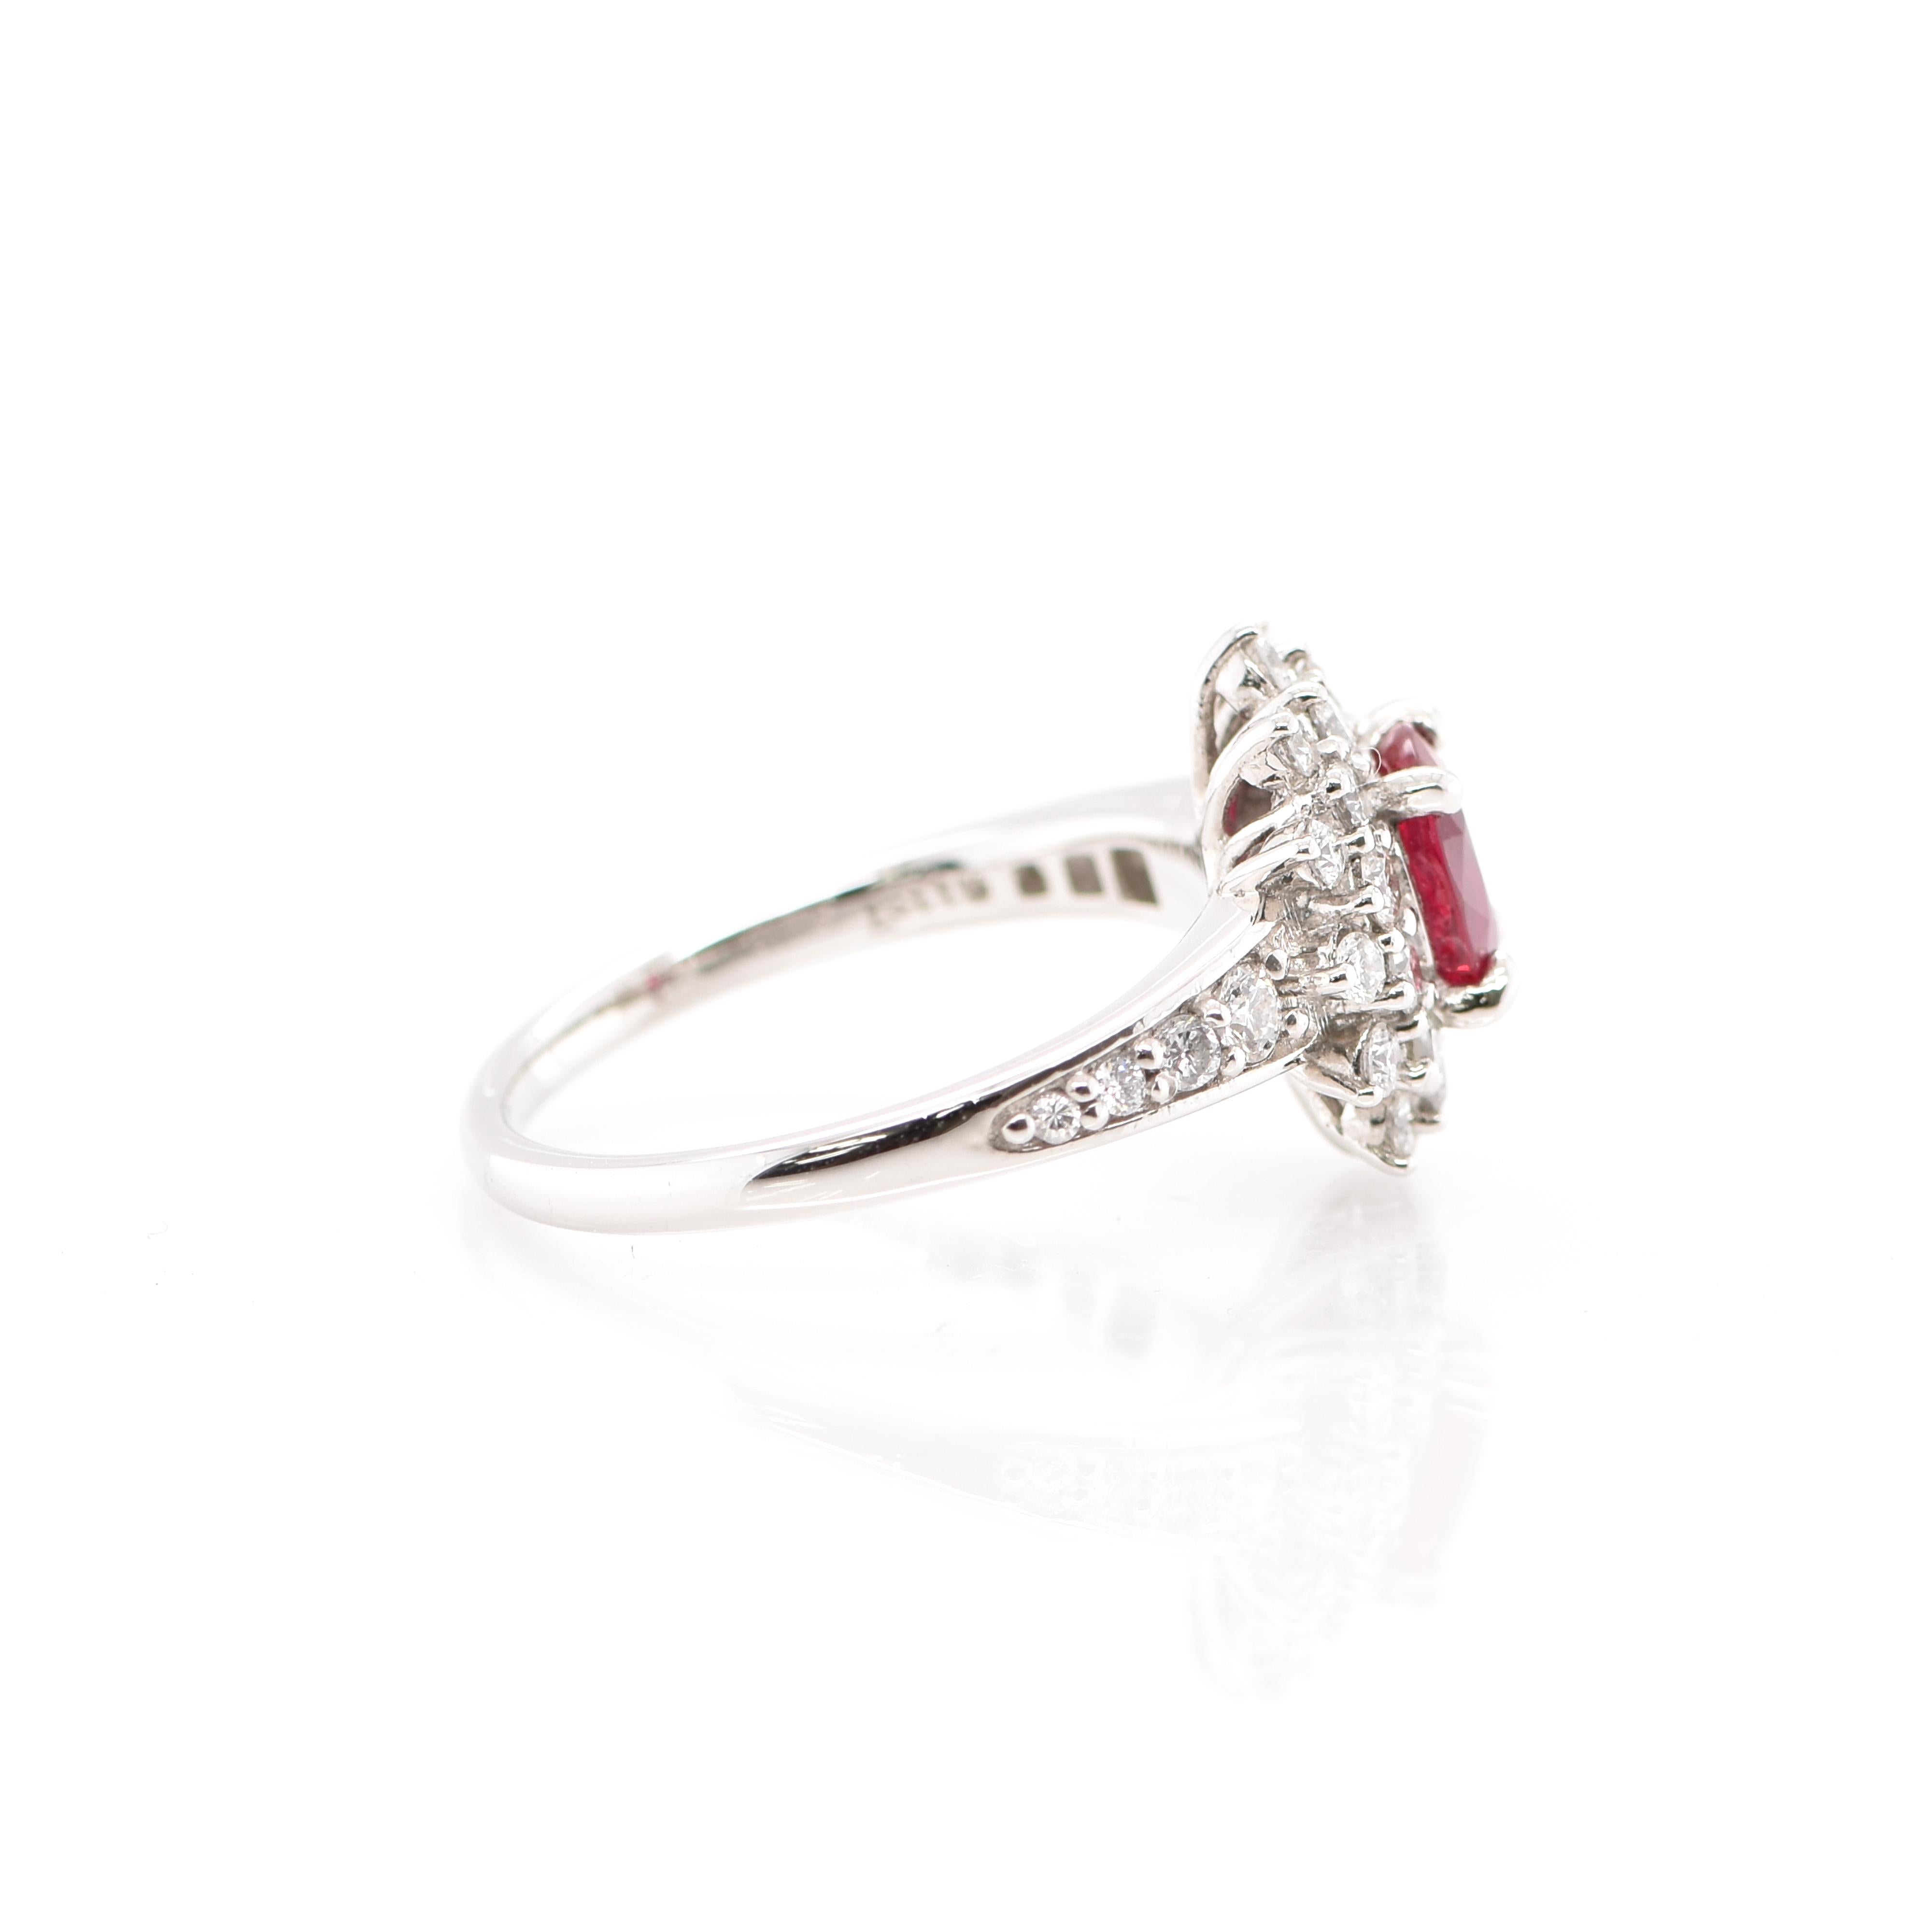 Women's 1.137 Carat Ruby and Diamond Double Halo Ring Set in Platinum